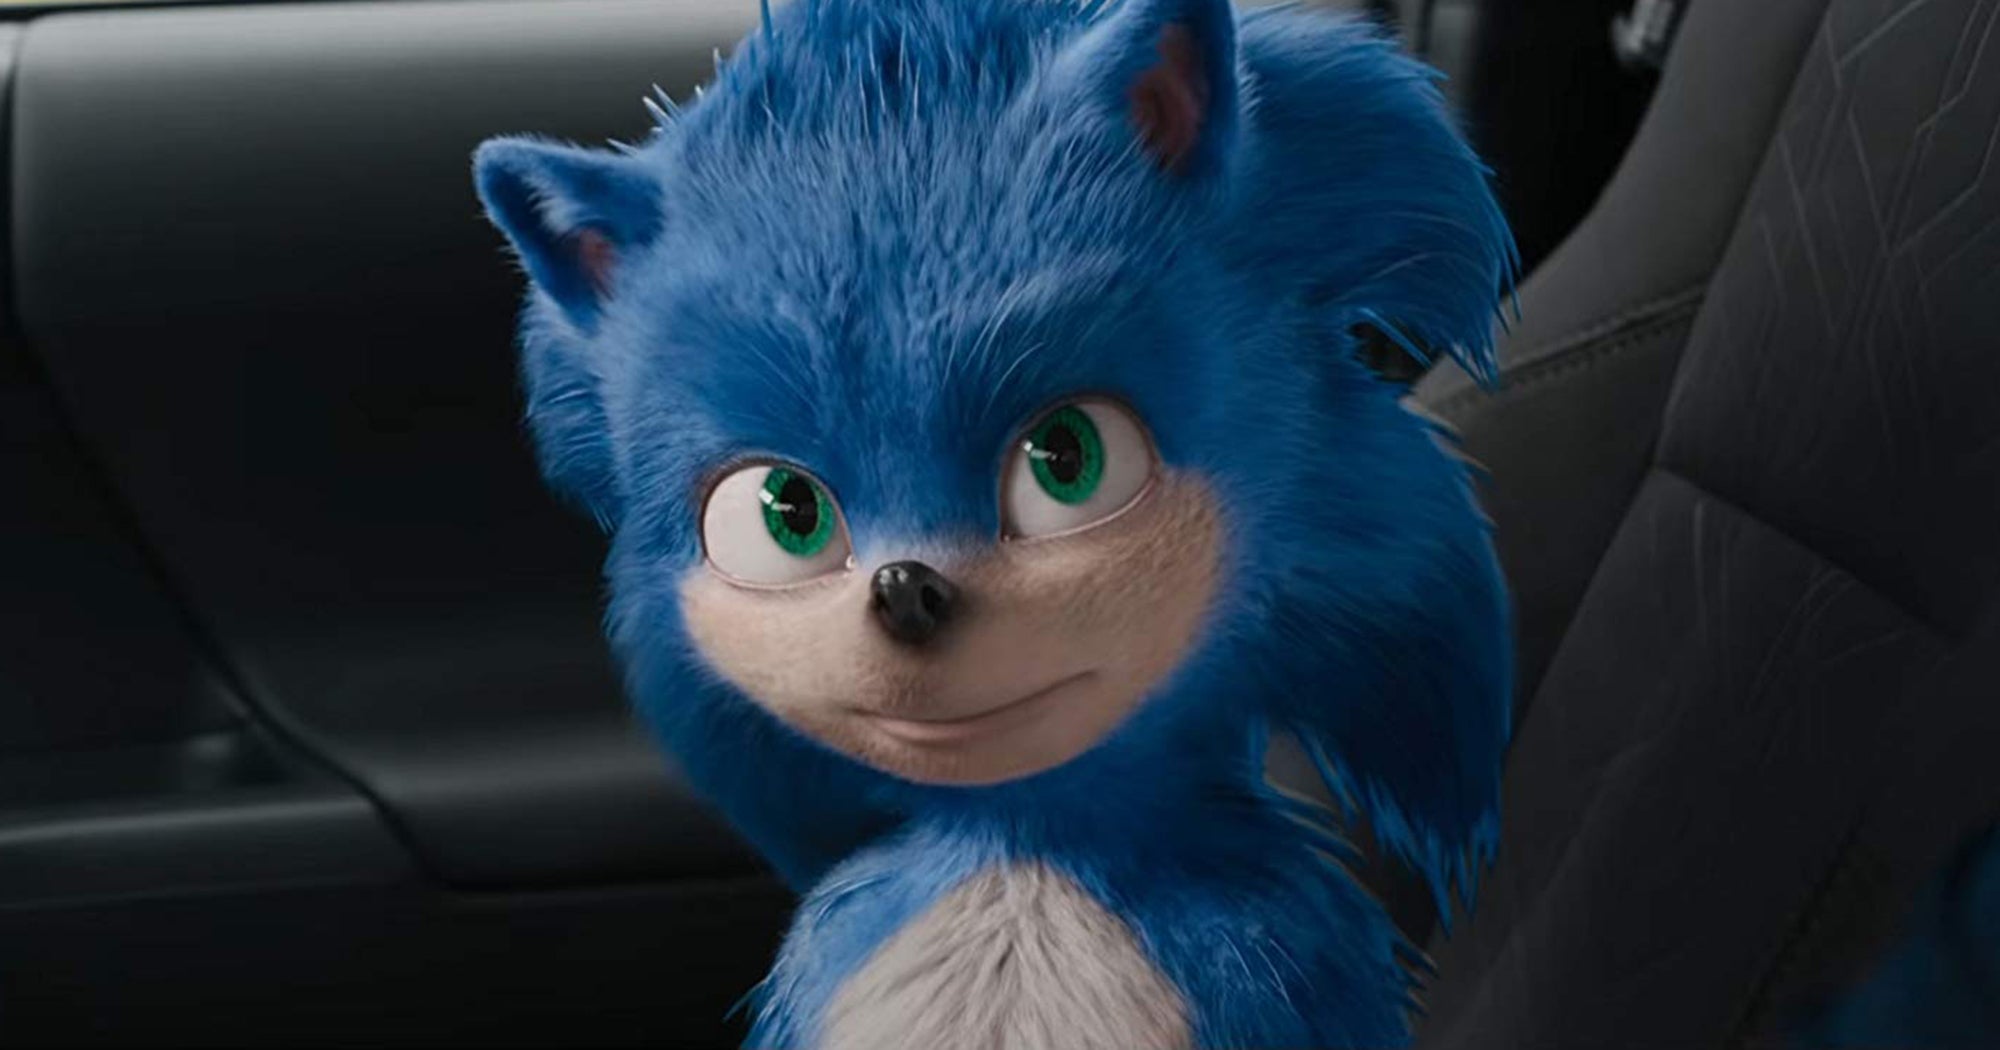 First look at Sonic redesign from Sonic the Hedgehog 2020. Now that's a  SONIC! 